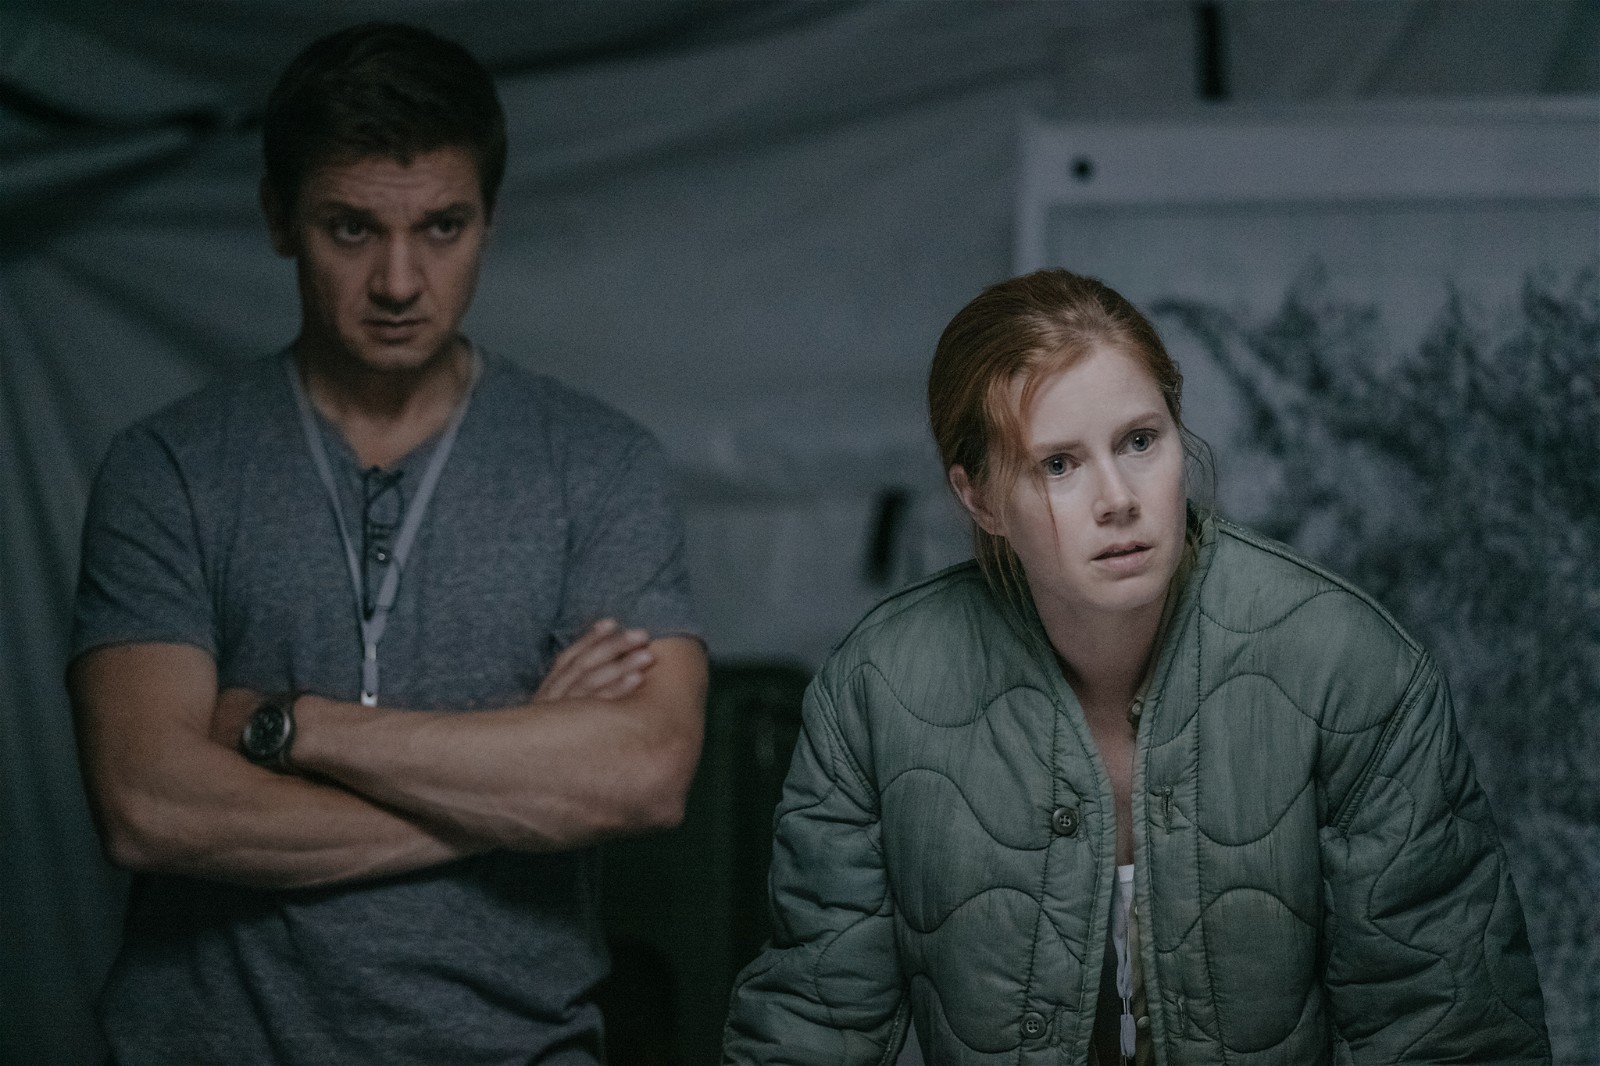 Jeremy Renner and Amy Adams' characters deconstructed alien behavior and language in Arrival